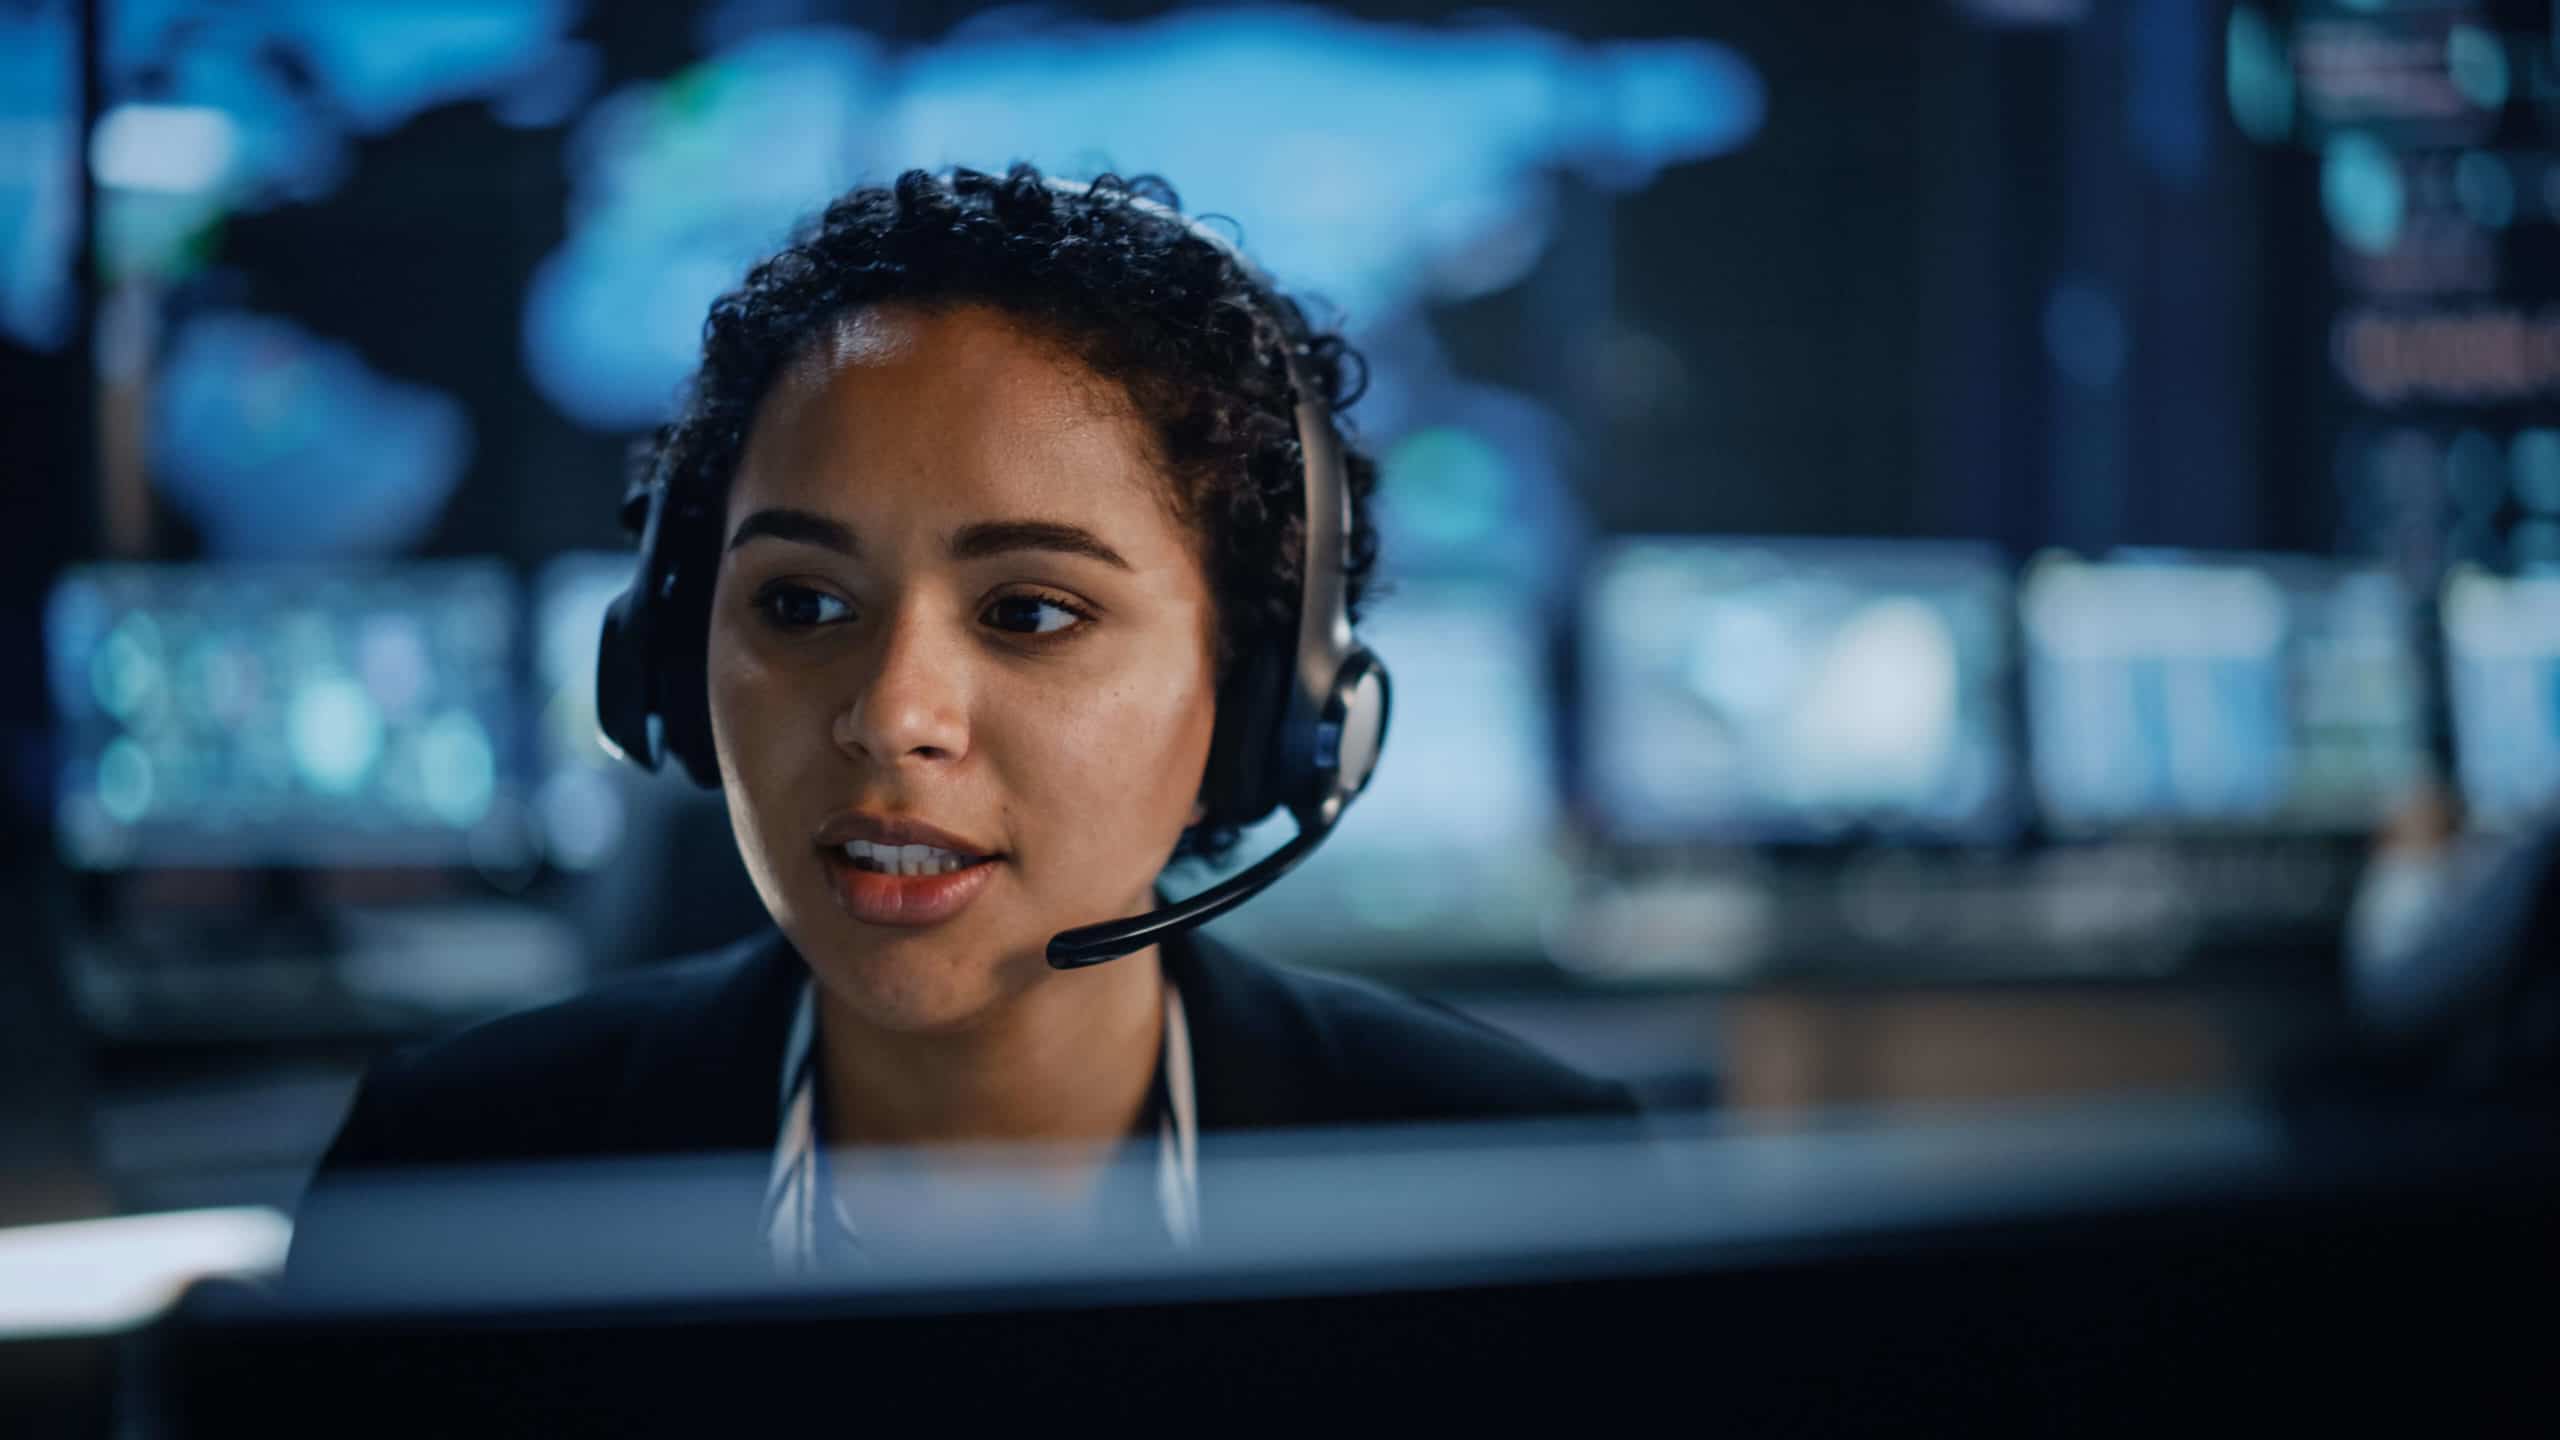 Portrait of Professional Technical Support Female Specialist Working on Computer in Monitoring Control Room with Digital Screens. Employee Wears Headphones with Mic and Talking on a Call.